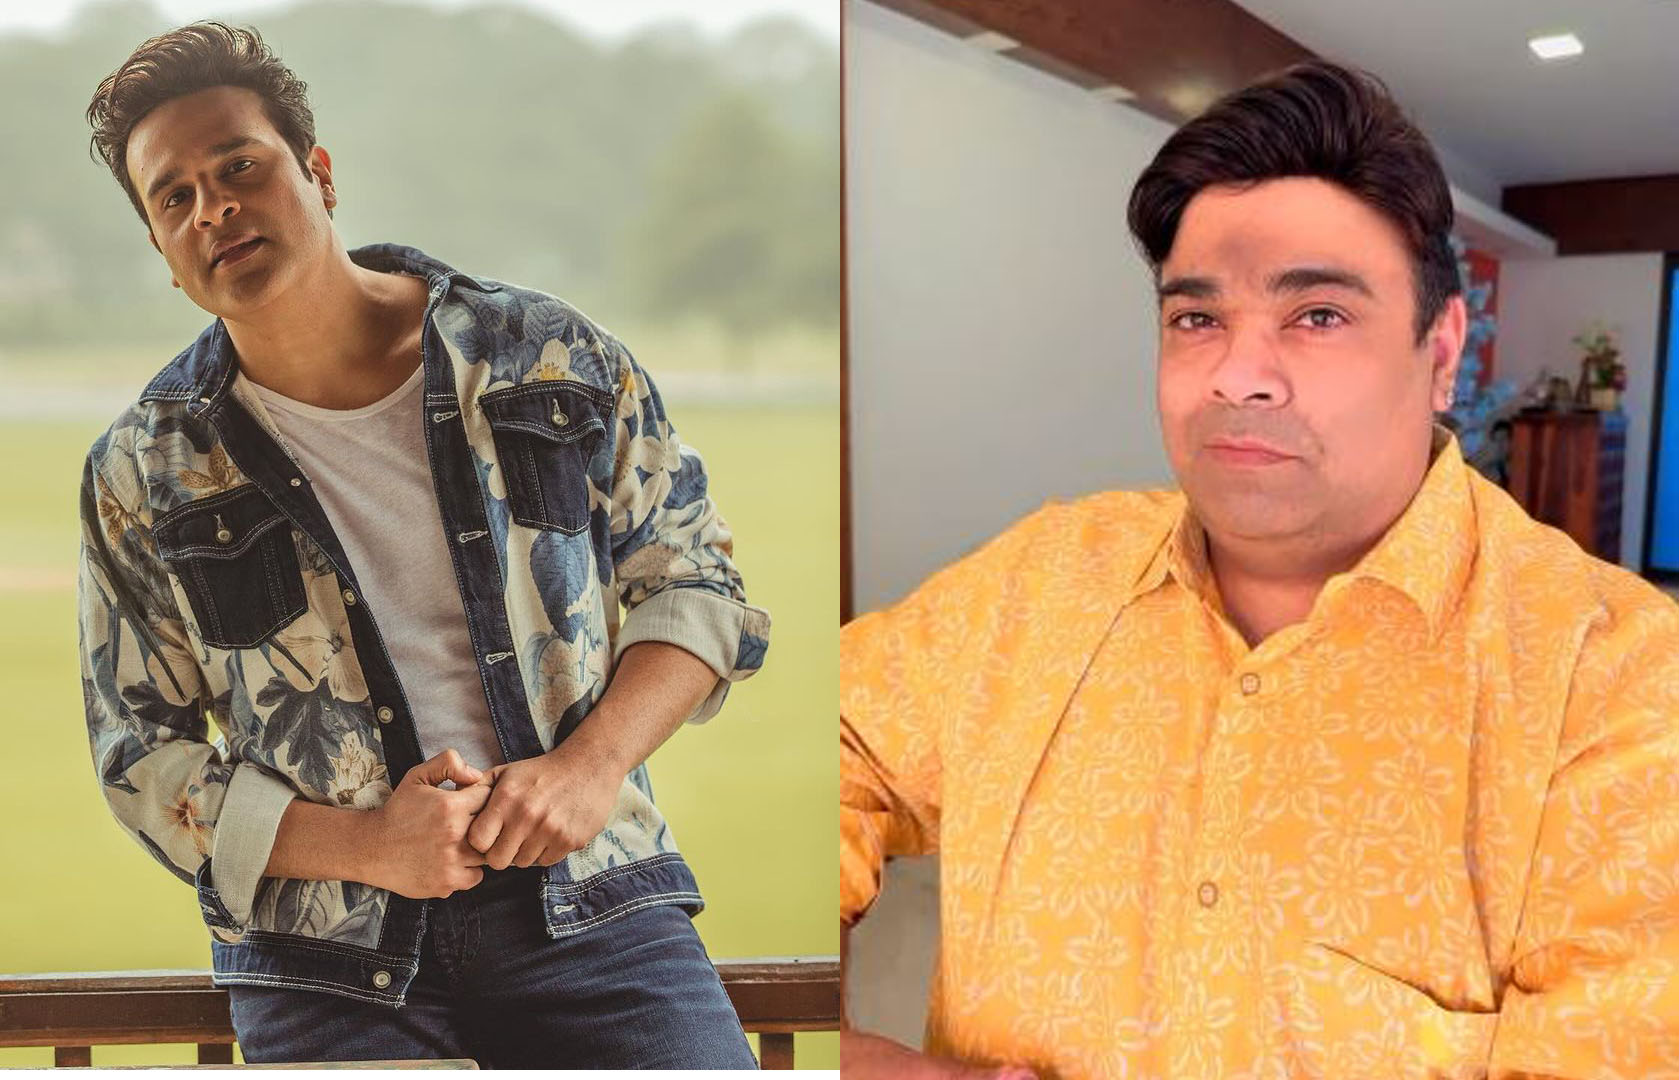 Krushna Abhishek Slapped Kiku Sharda In The Latest Video. Find Out The Reason Here And Check How Celebrities Reacted To It!